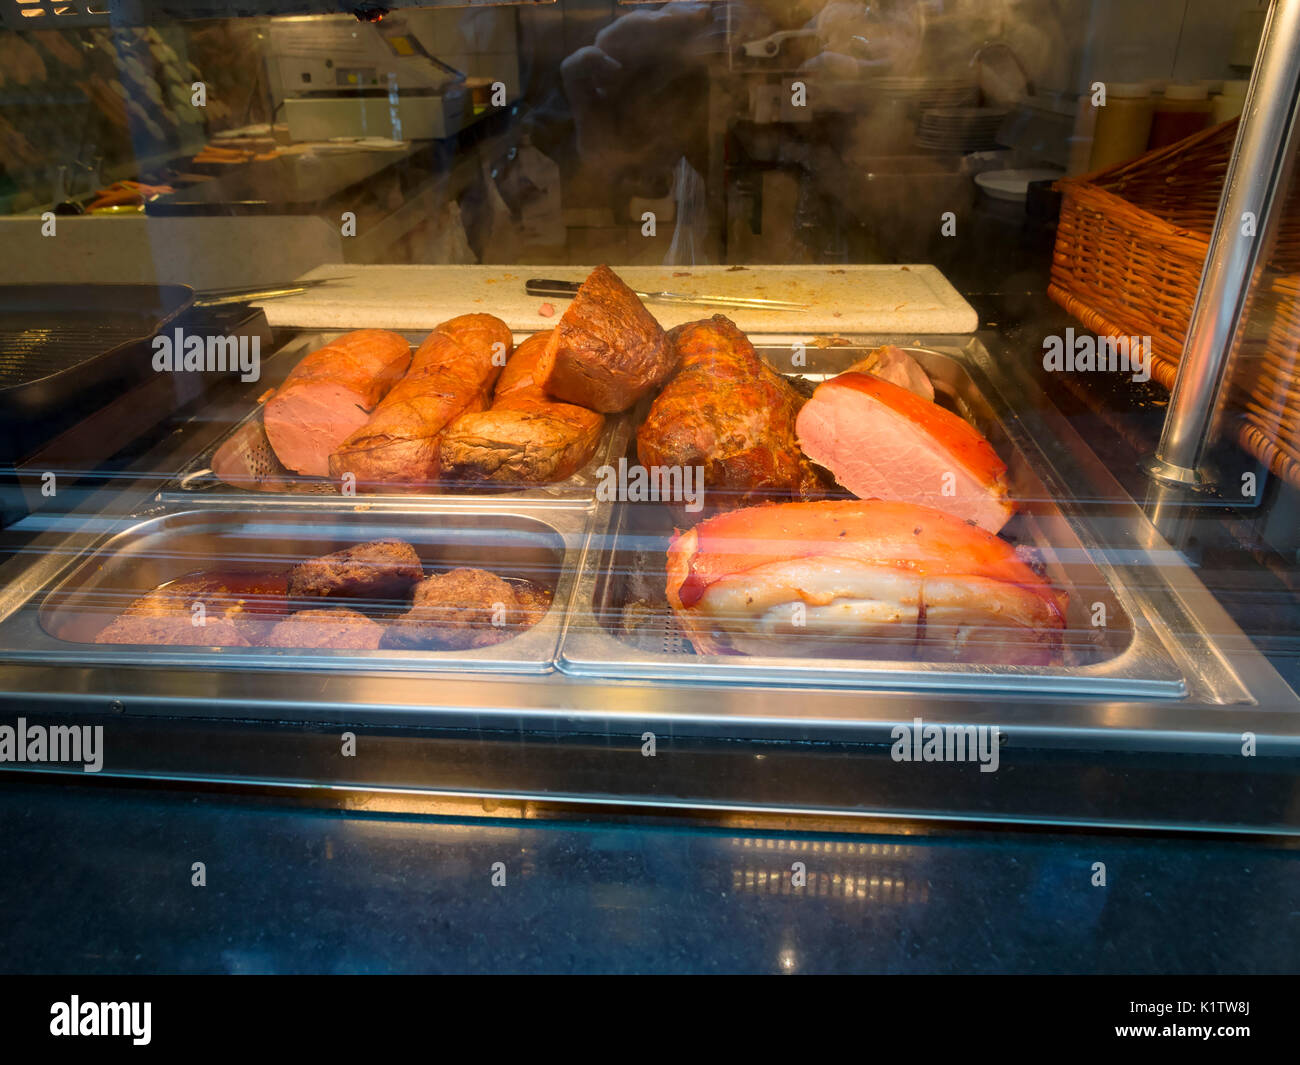 Roast meats on display in a cafe window in Cochem, Germany Stock Photo